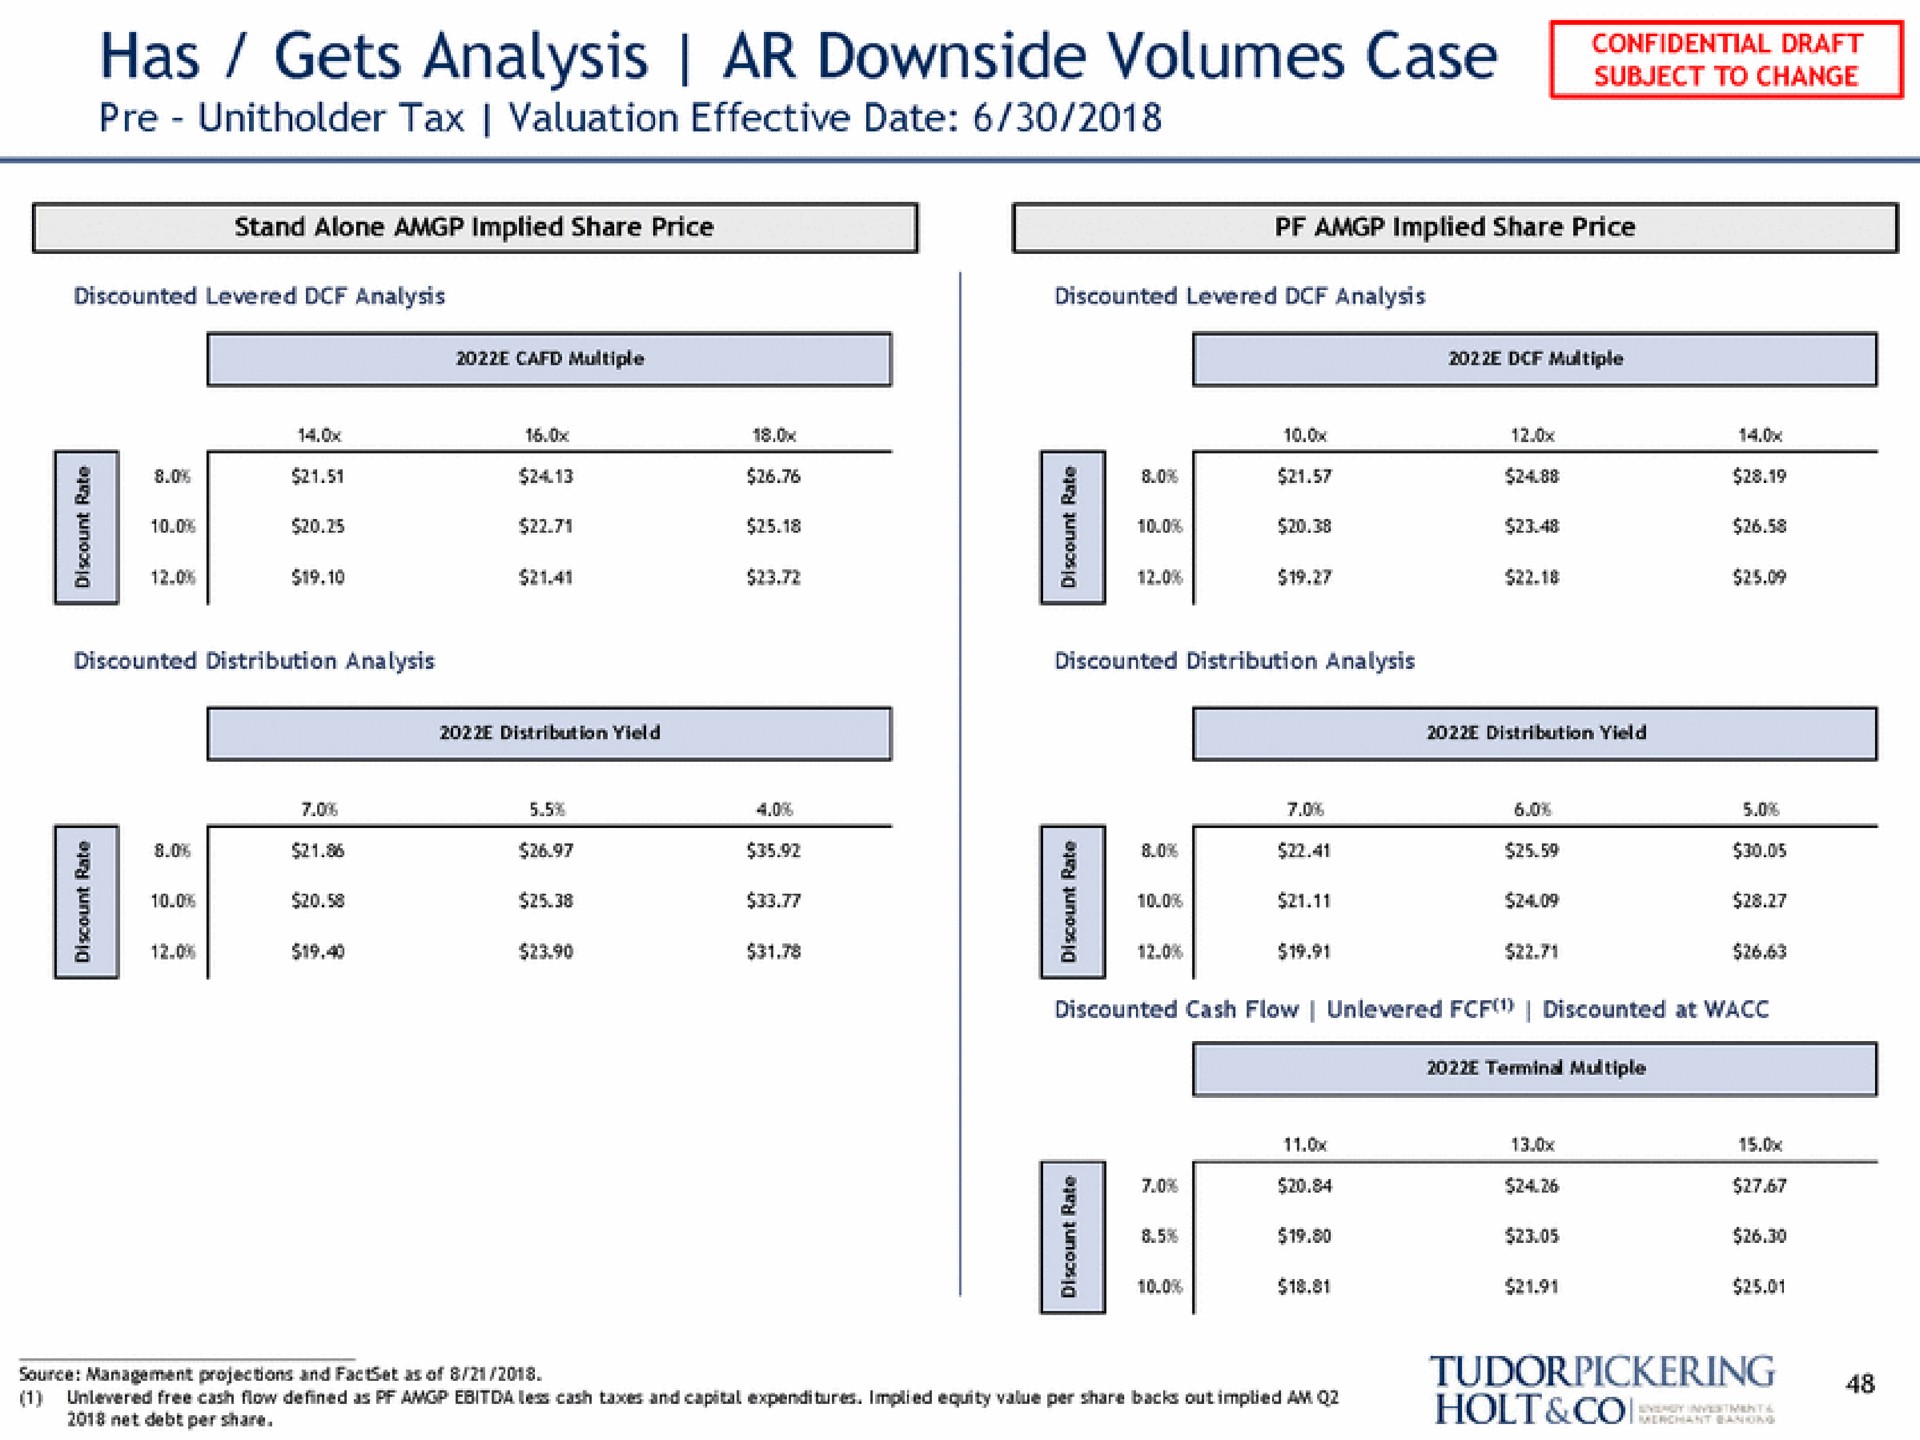 has gets analysis downside volumes case | Tudor, Pickering, Holt & Co